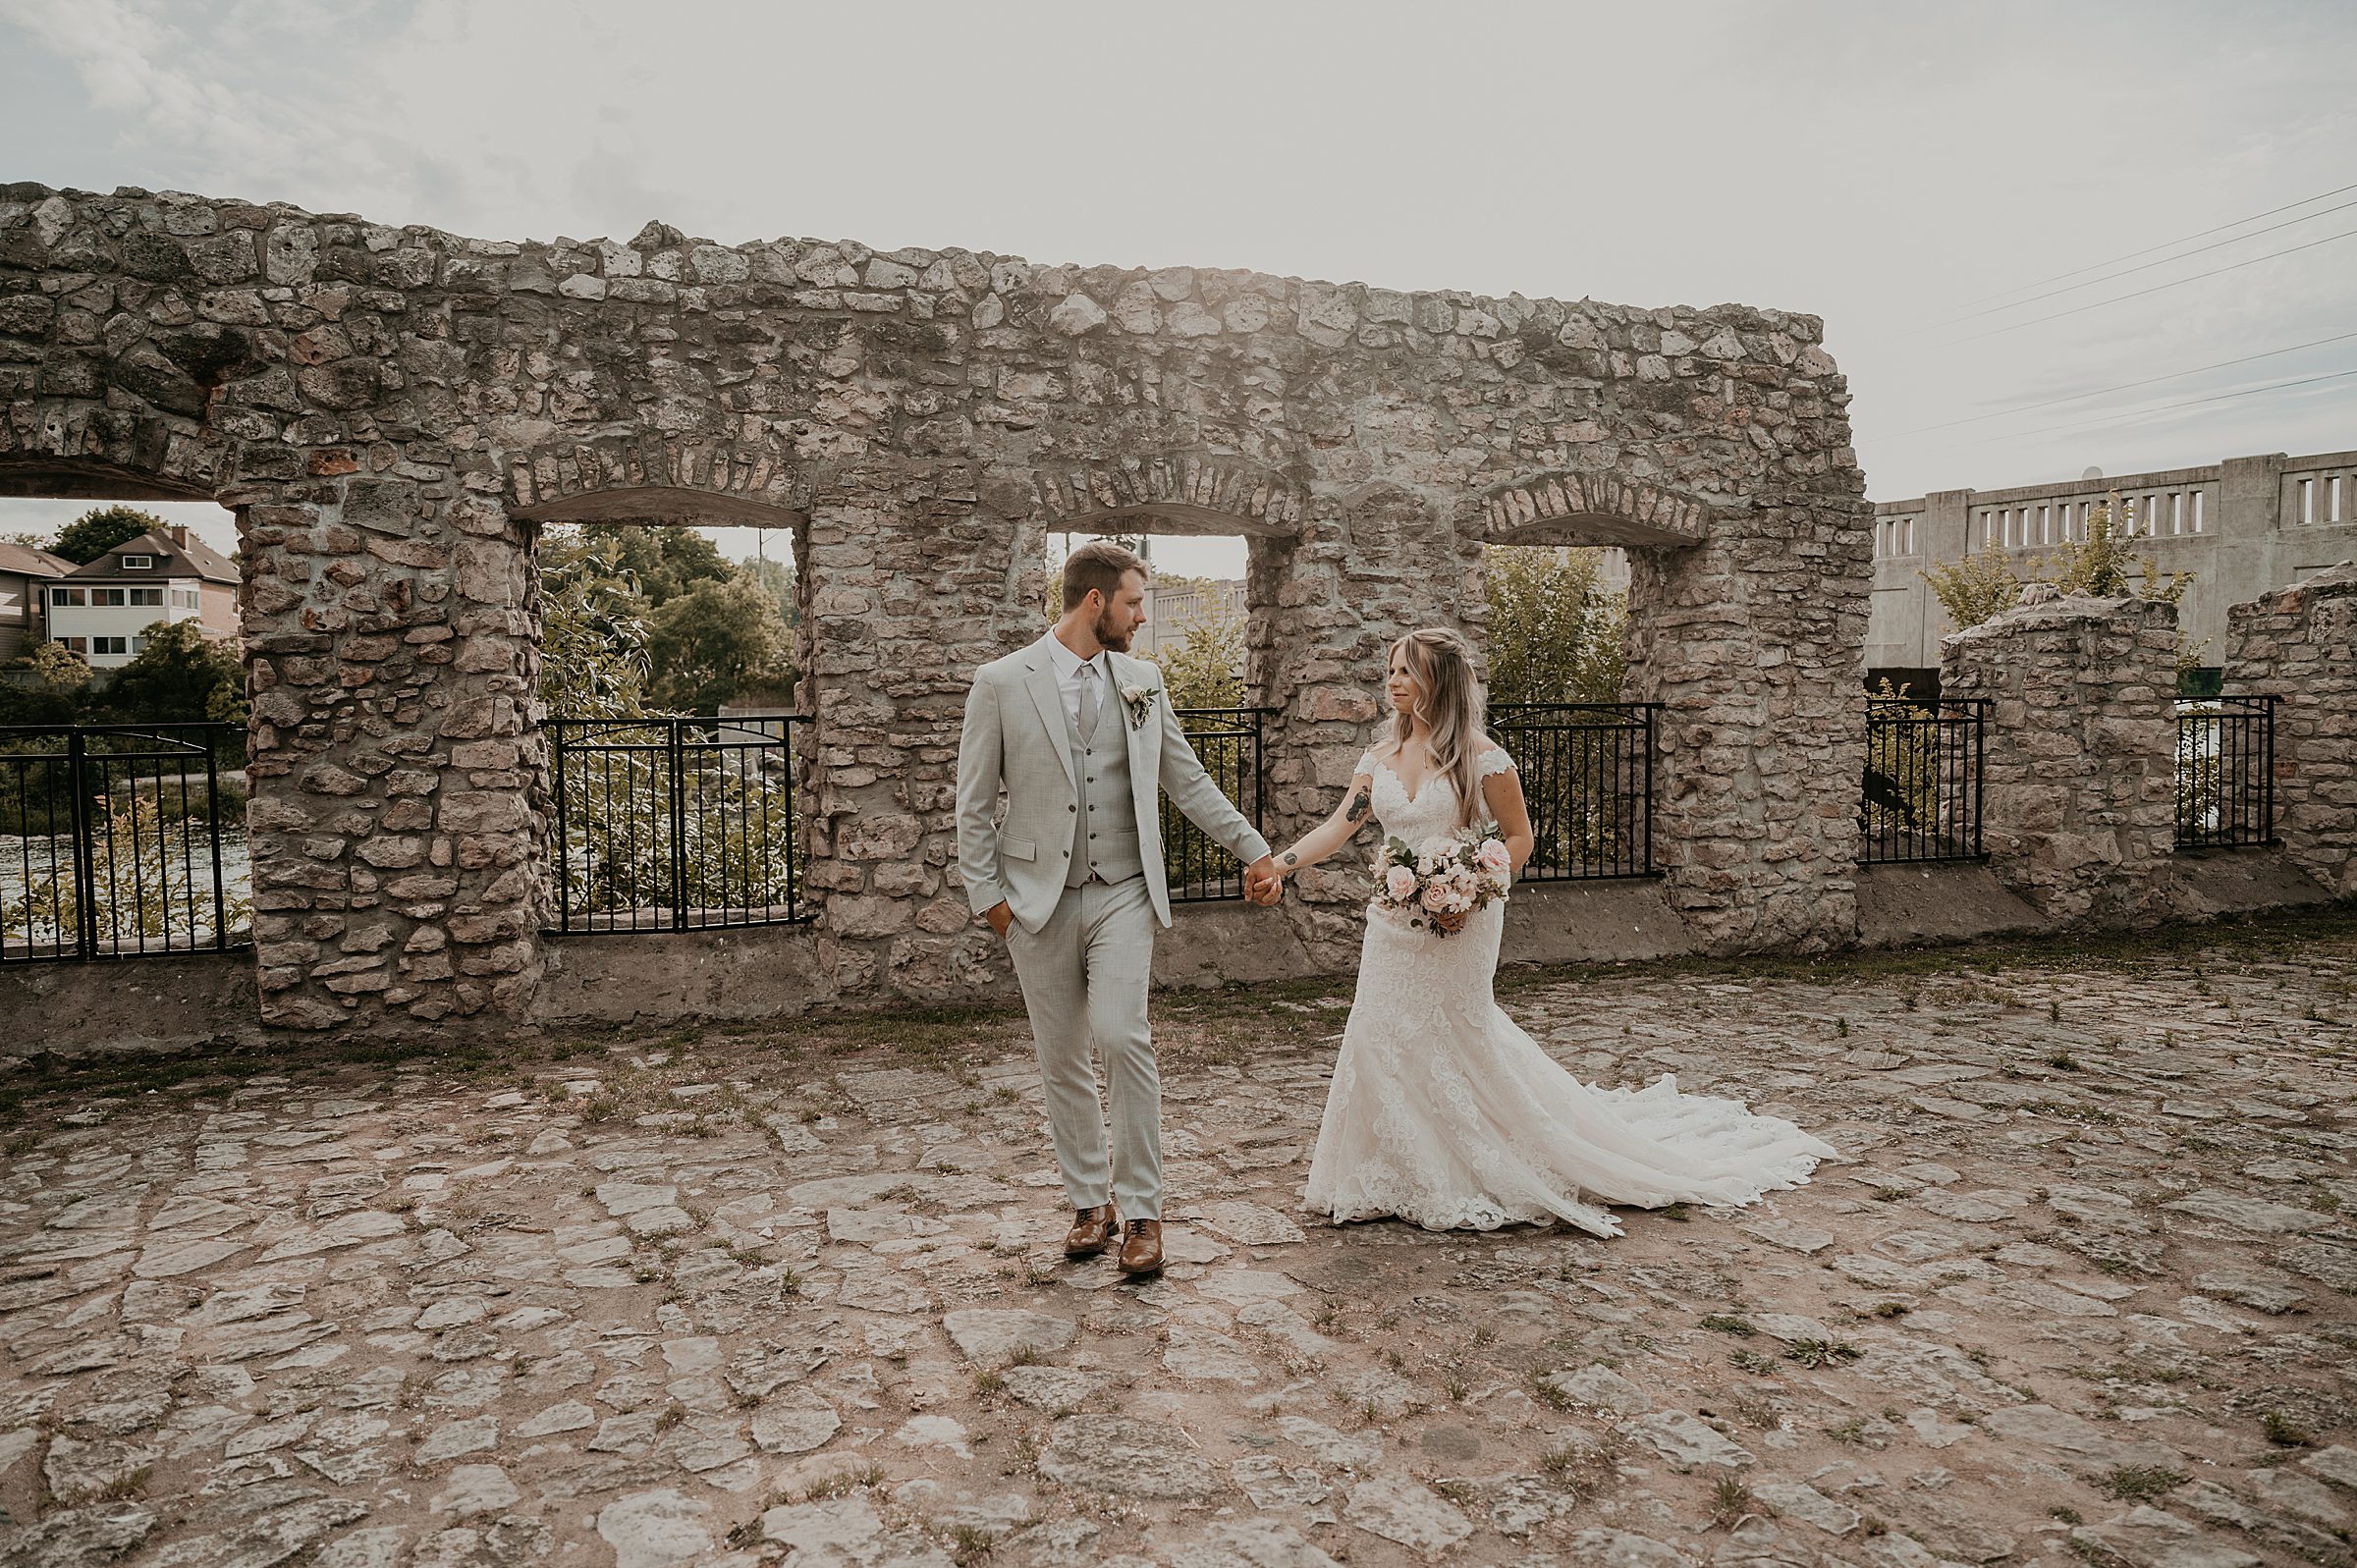 Bride and groom walk amongst the mill race park ruins for a candid wedding day photo.